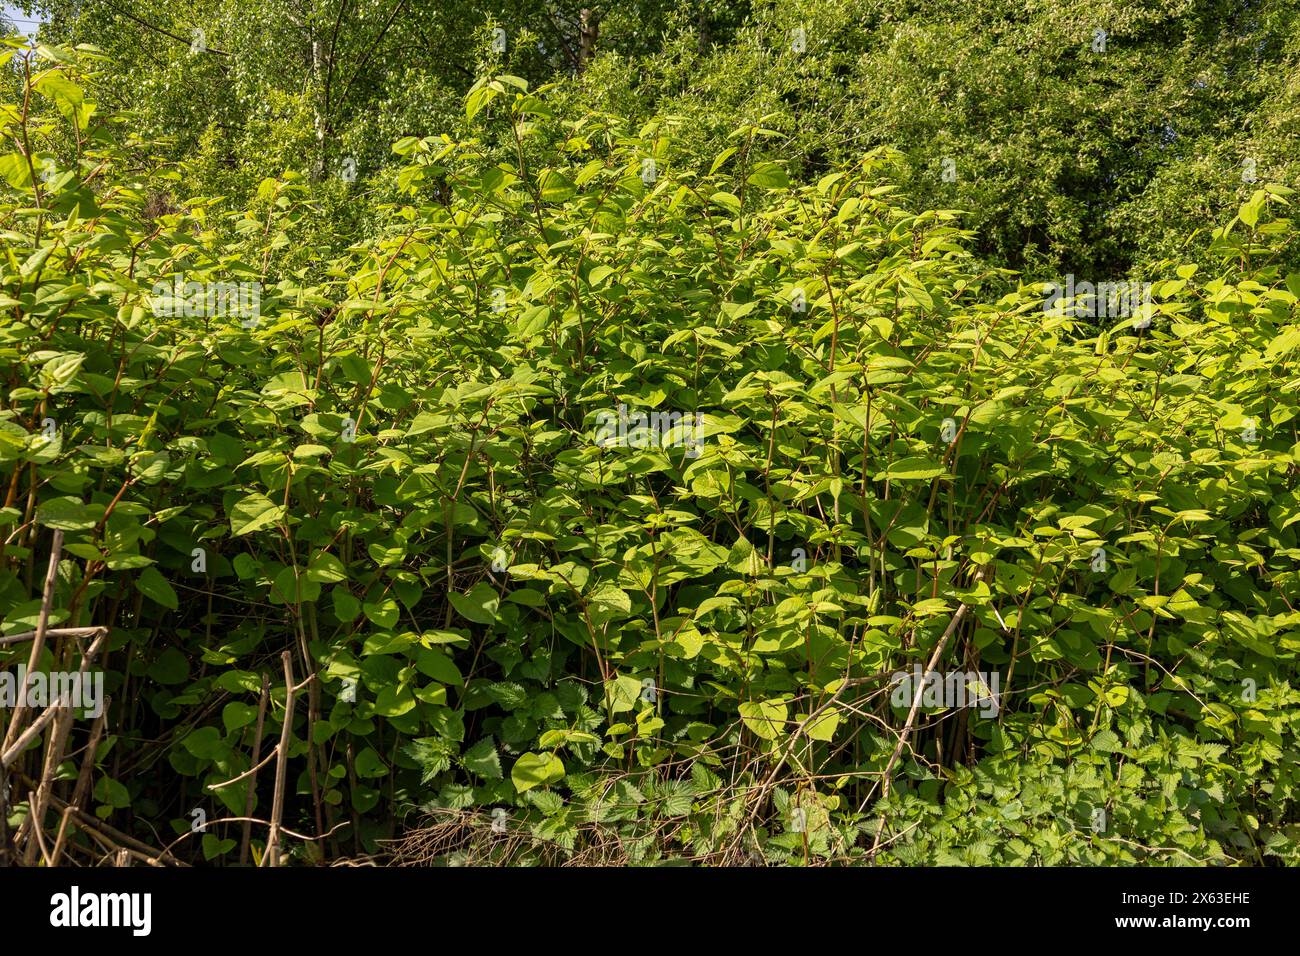 Japanese knotweed Reynoutria japonica  is an invasive non-native species of plant Stock Photo